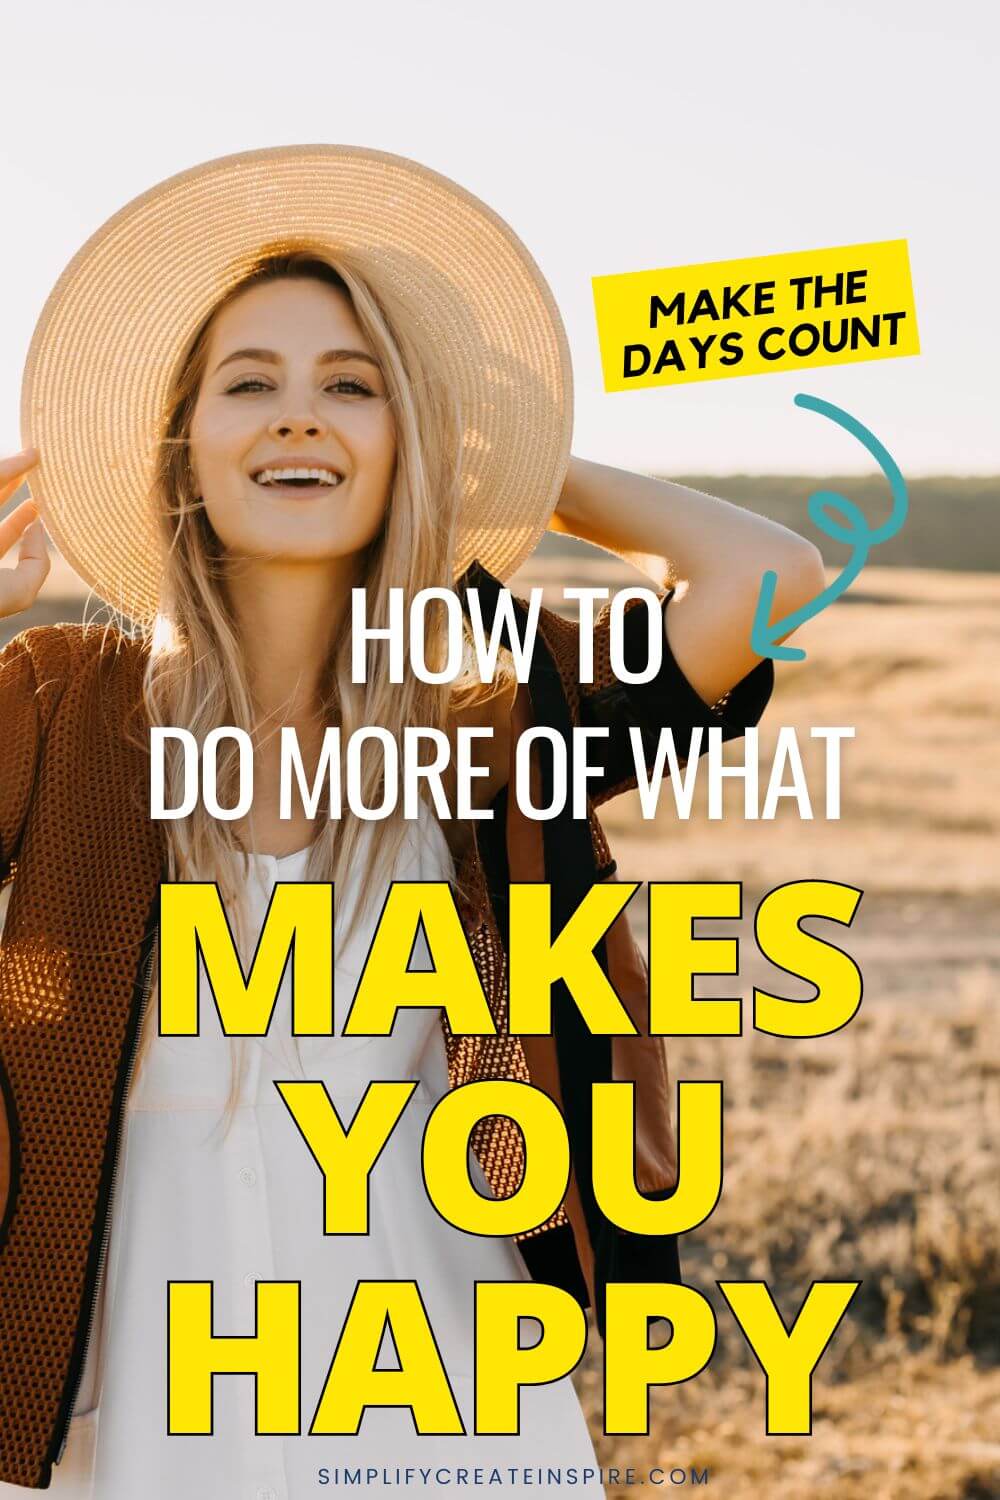 How to do more of what makes you happy.